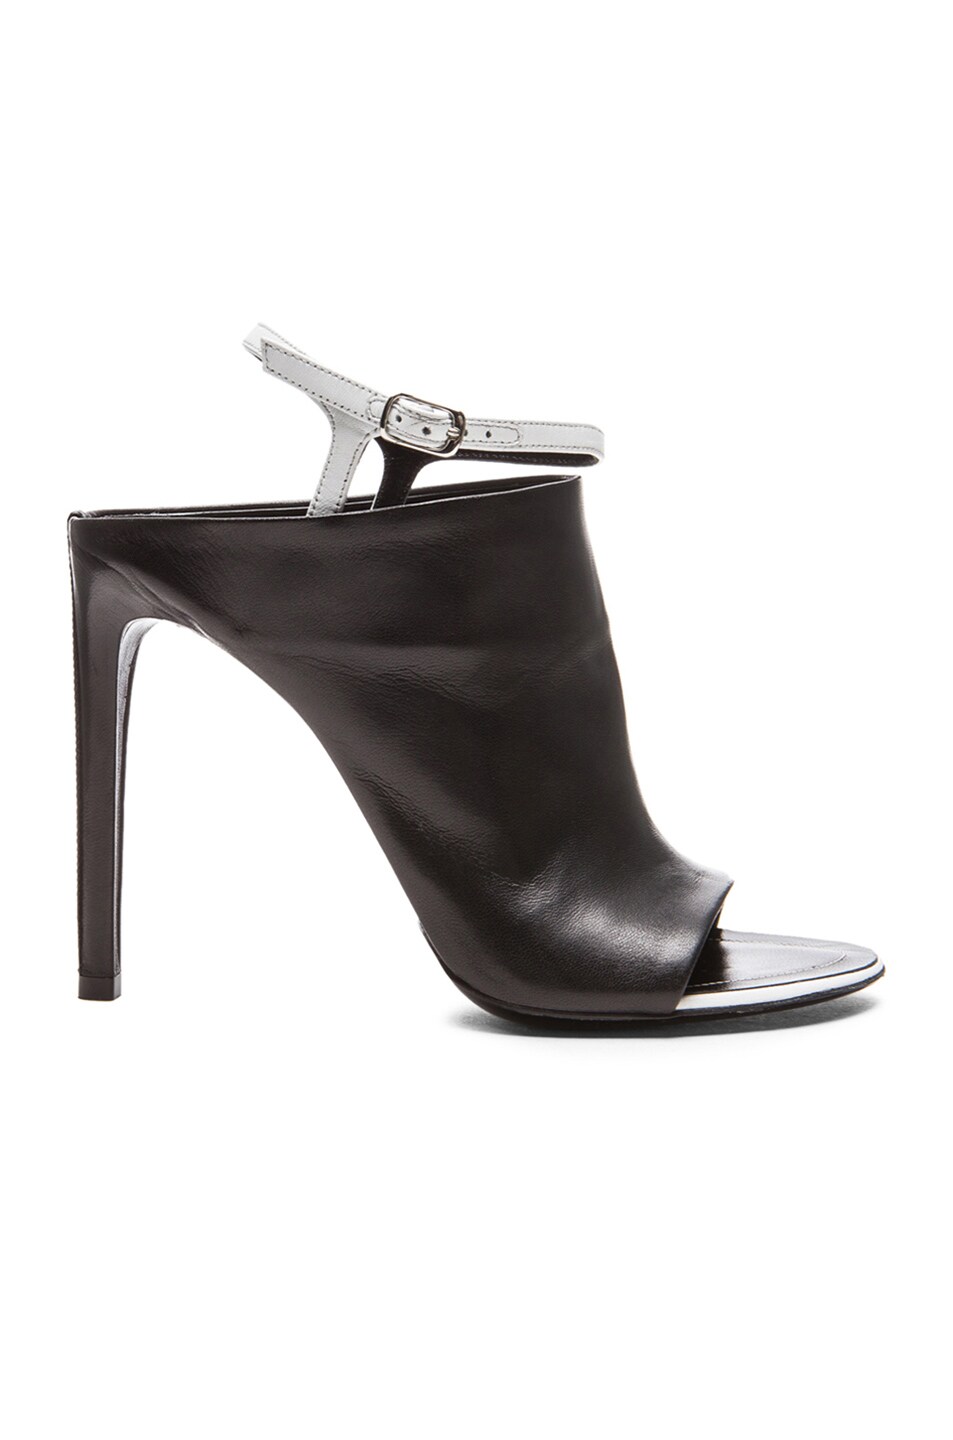 Image 1 of Balenciaga Open Toe Lambskin Leather Sandals with Contrast Ankle Strap in Black & White